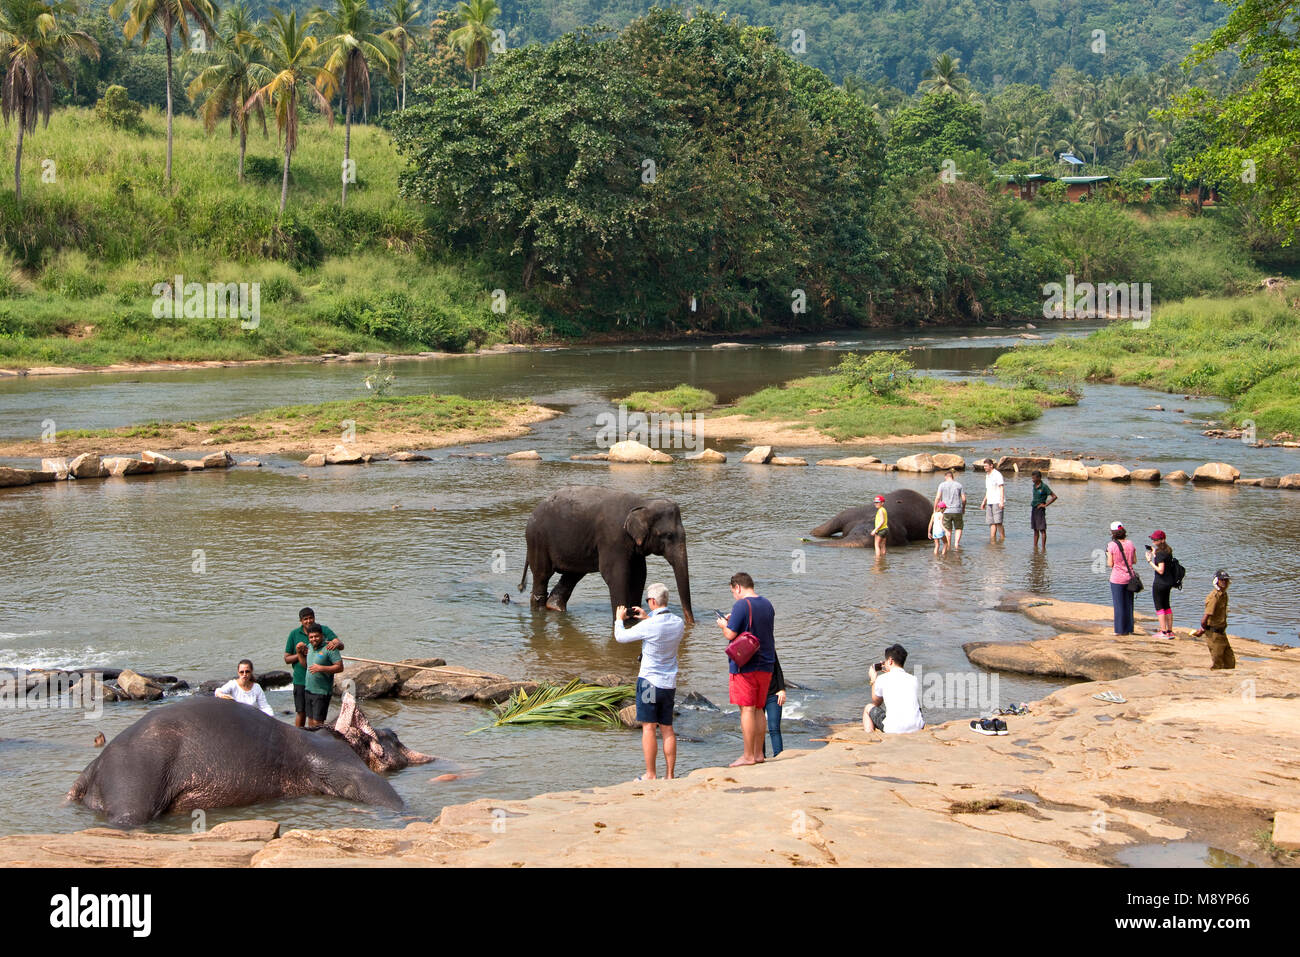 Sri Lankan elephants from the Pinnawala Elephant Orphanage bathing in the river with tourists watching and photographing them. Stock Photo